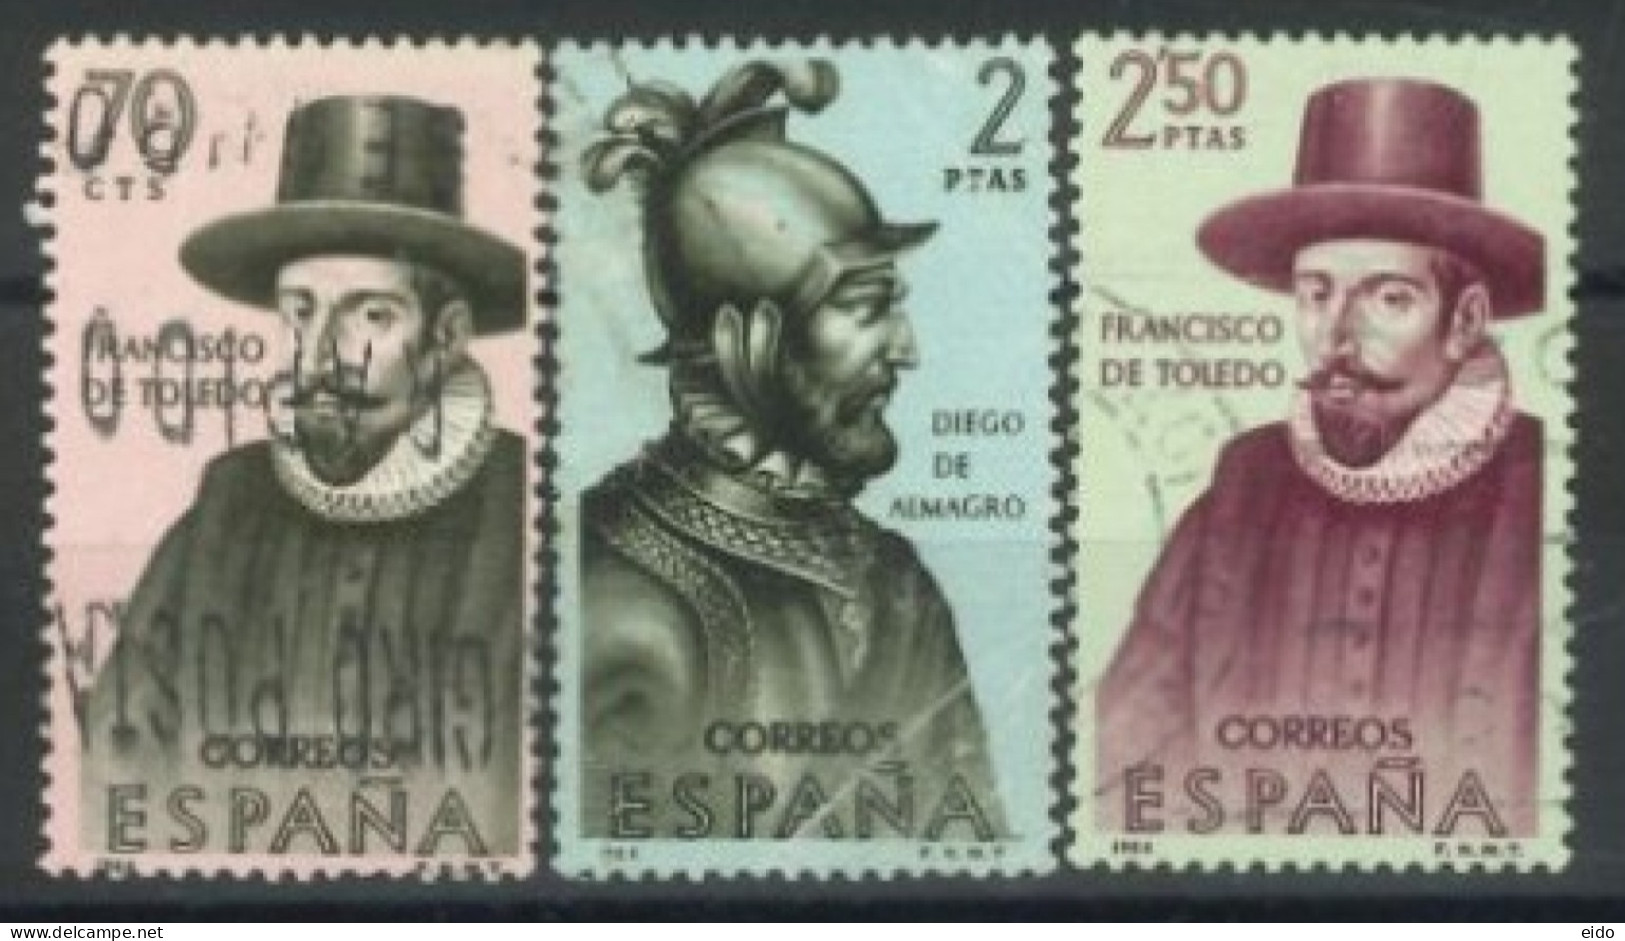 SPAIN, 1964, BUILDERS OF THE NEW WORLD STAMPS SET OF 3, # 1272,1274,& 1276, USED. - Gebraucht